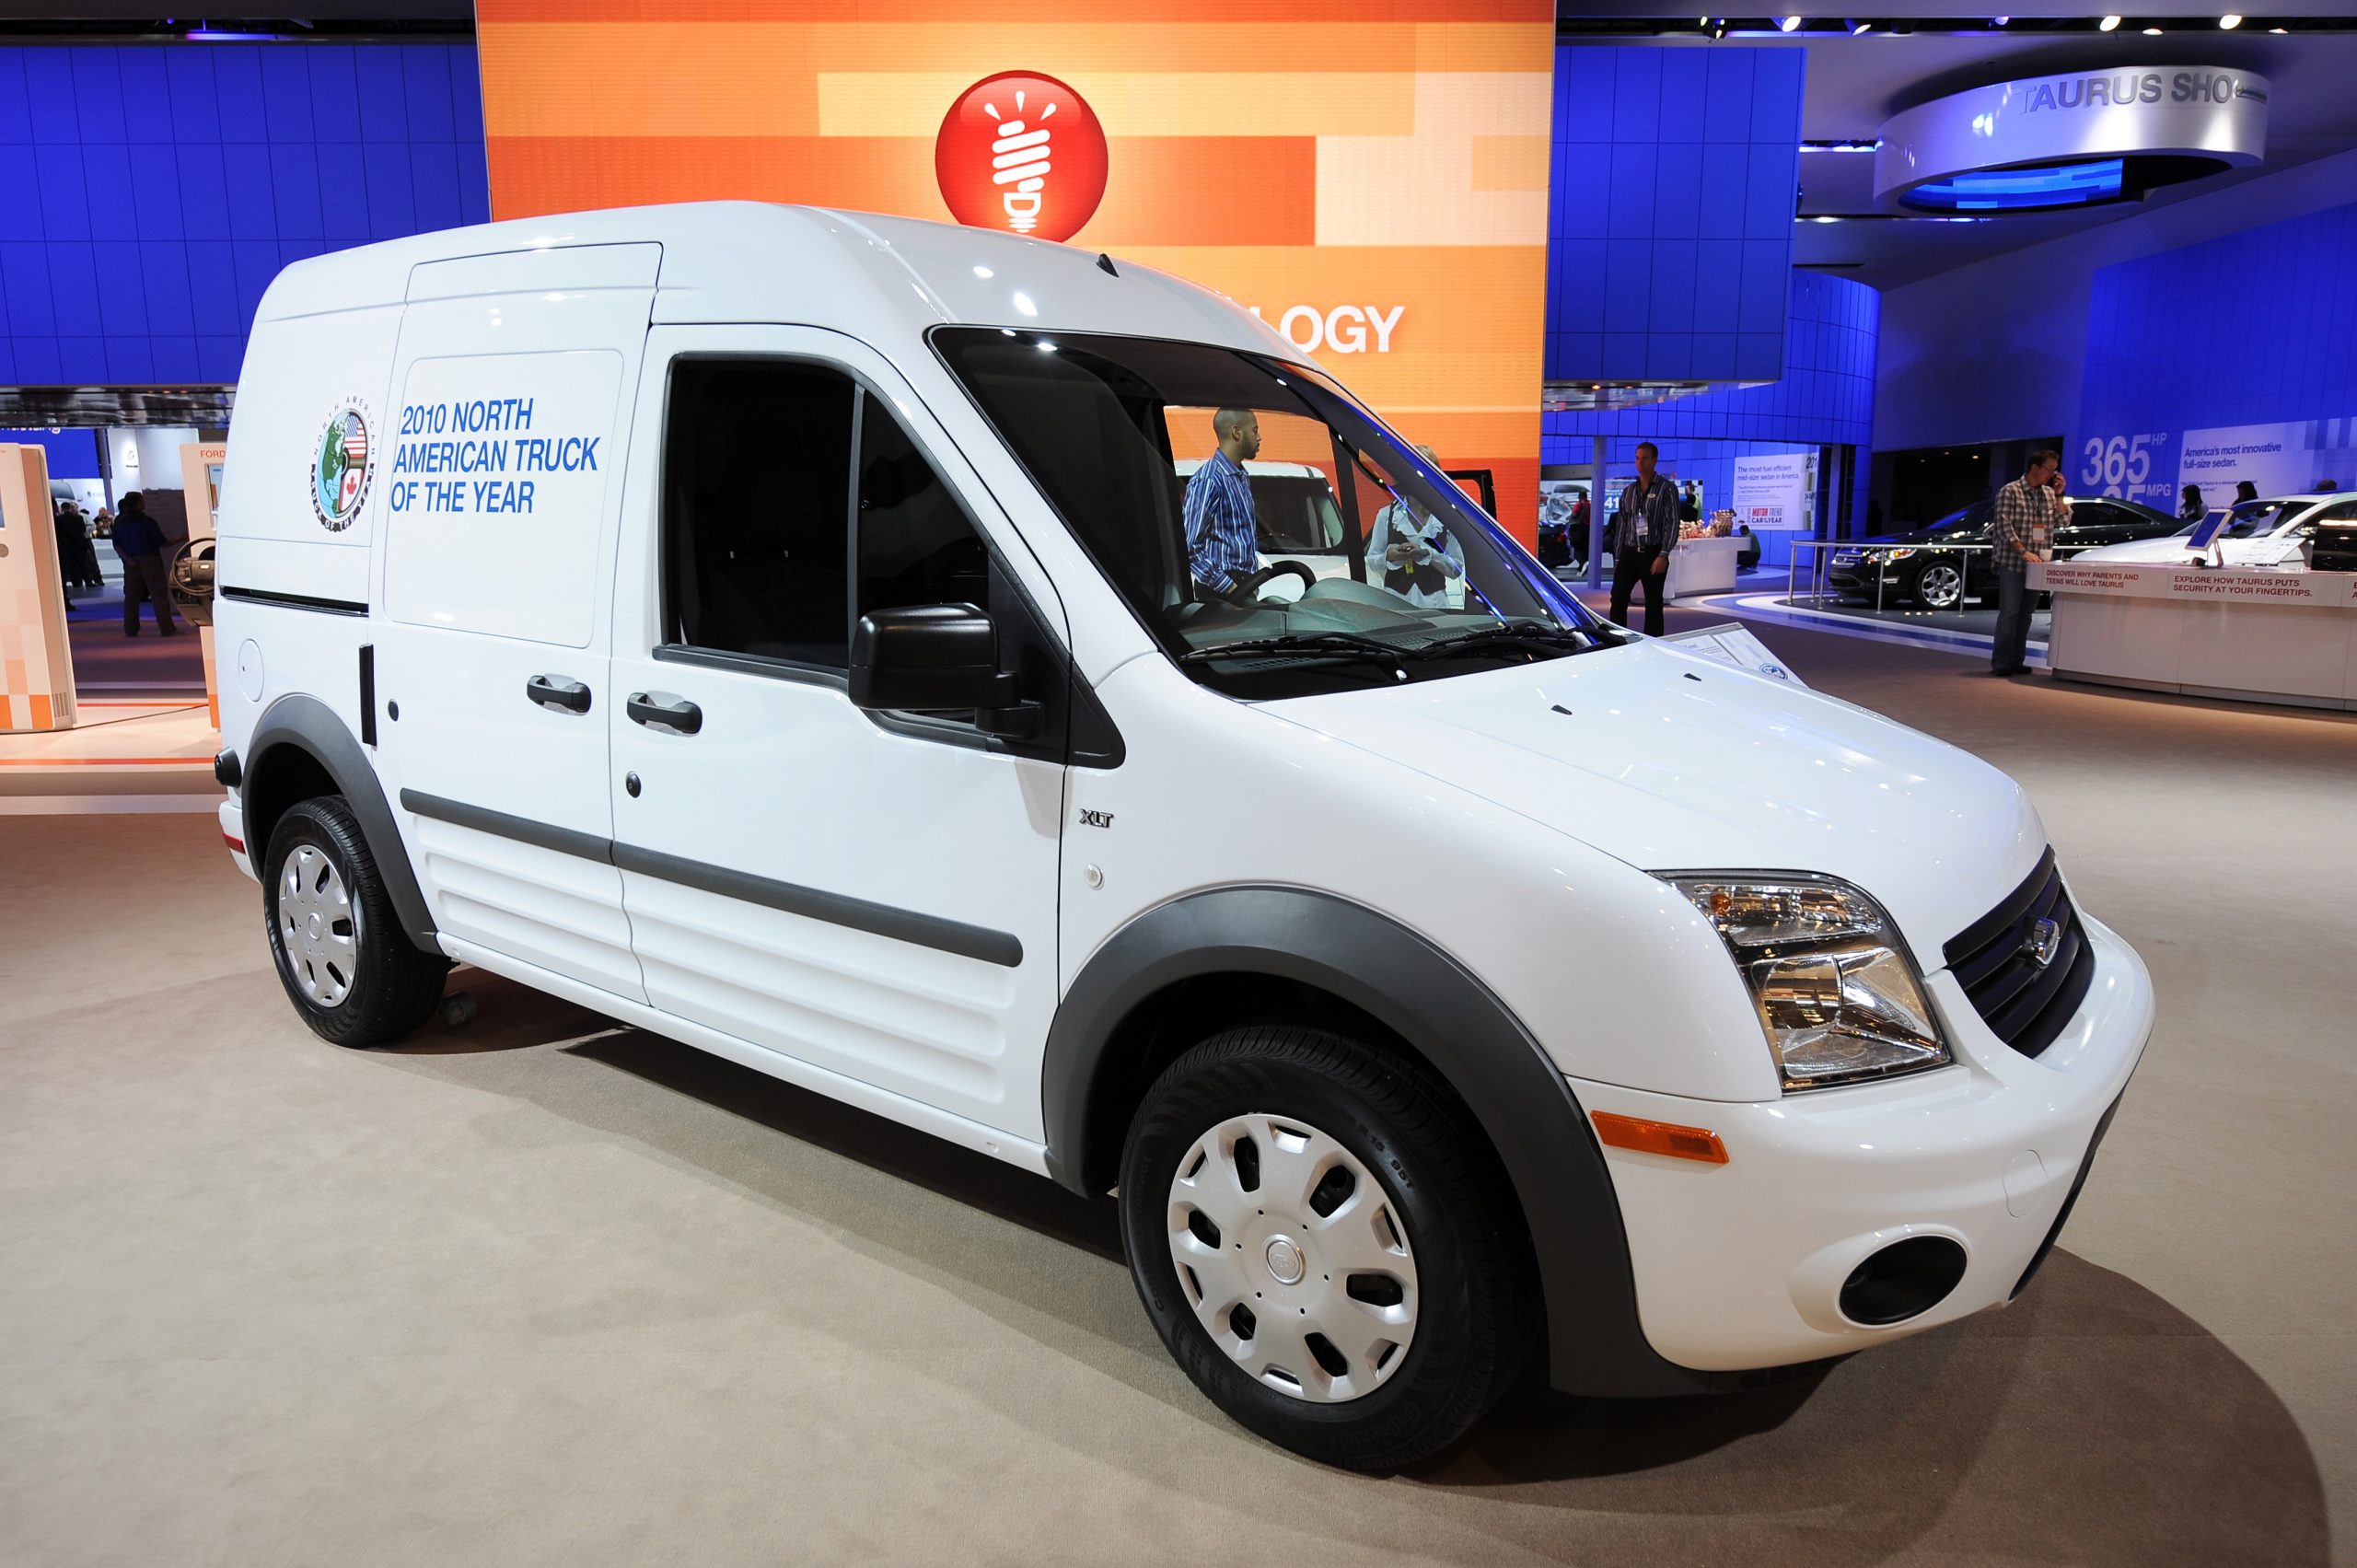 The Ford Transit Connect at the auto show